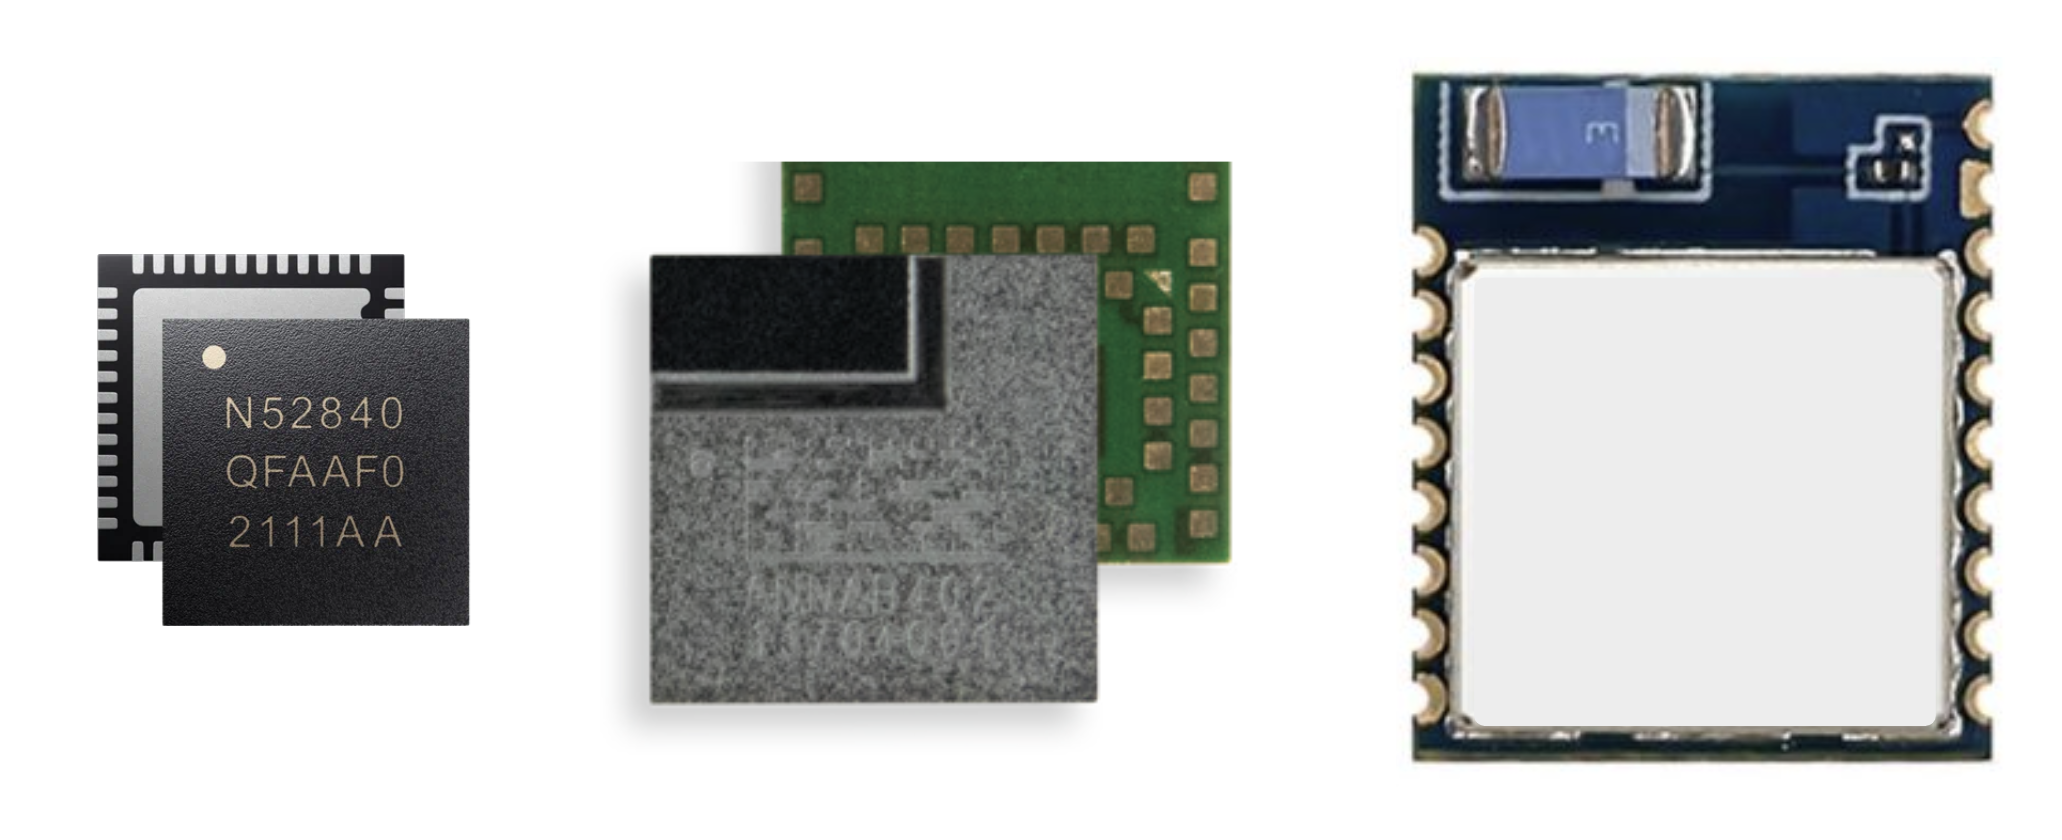 Blecon Modem Chips, SiPs and Modules